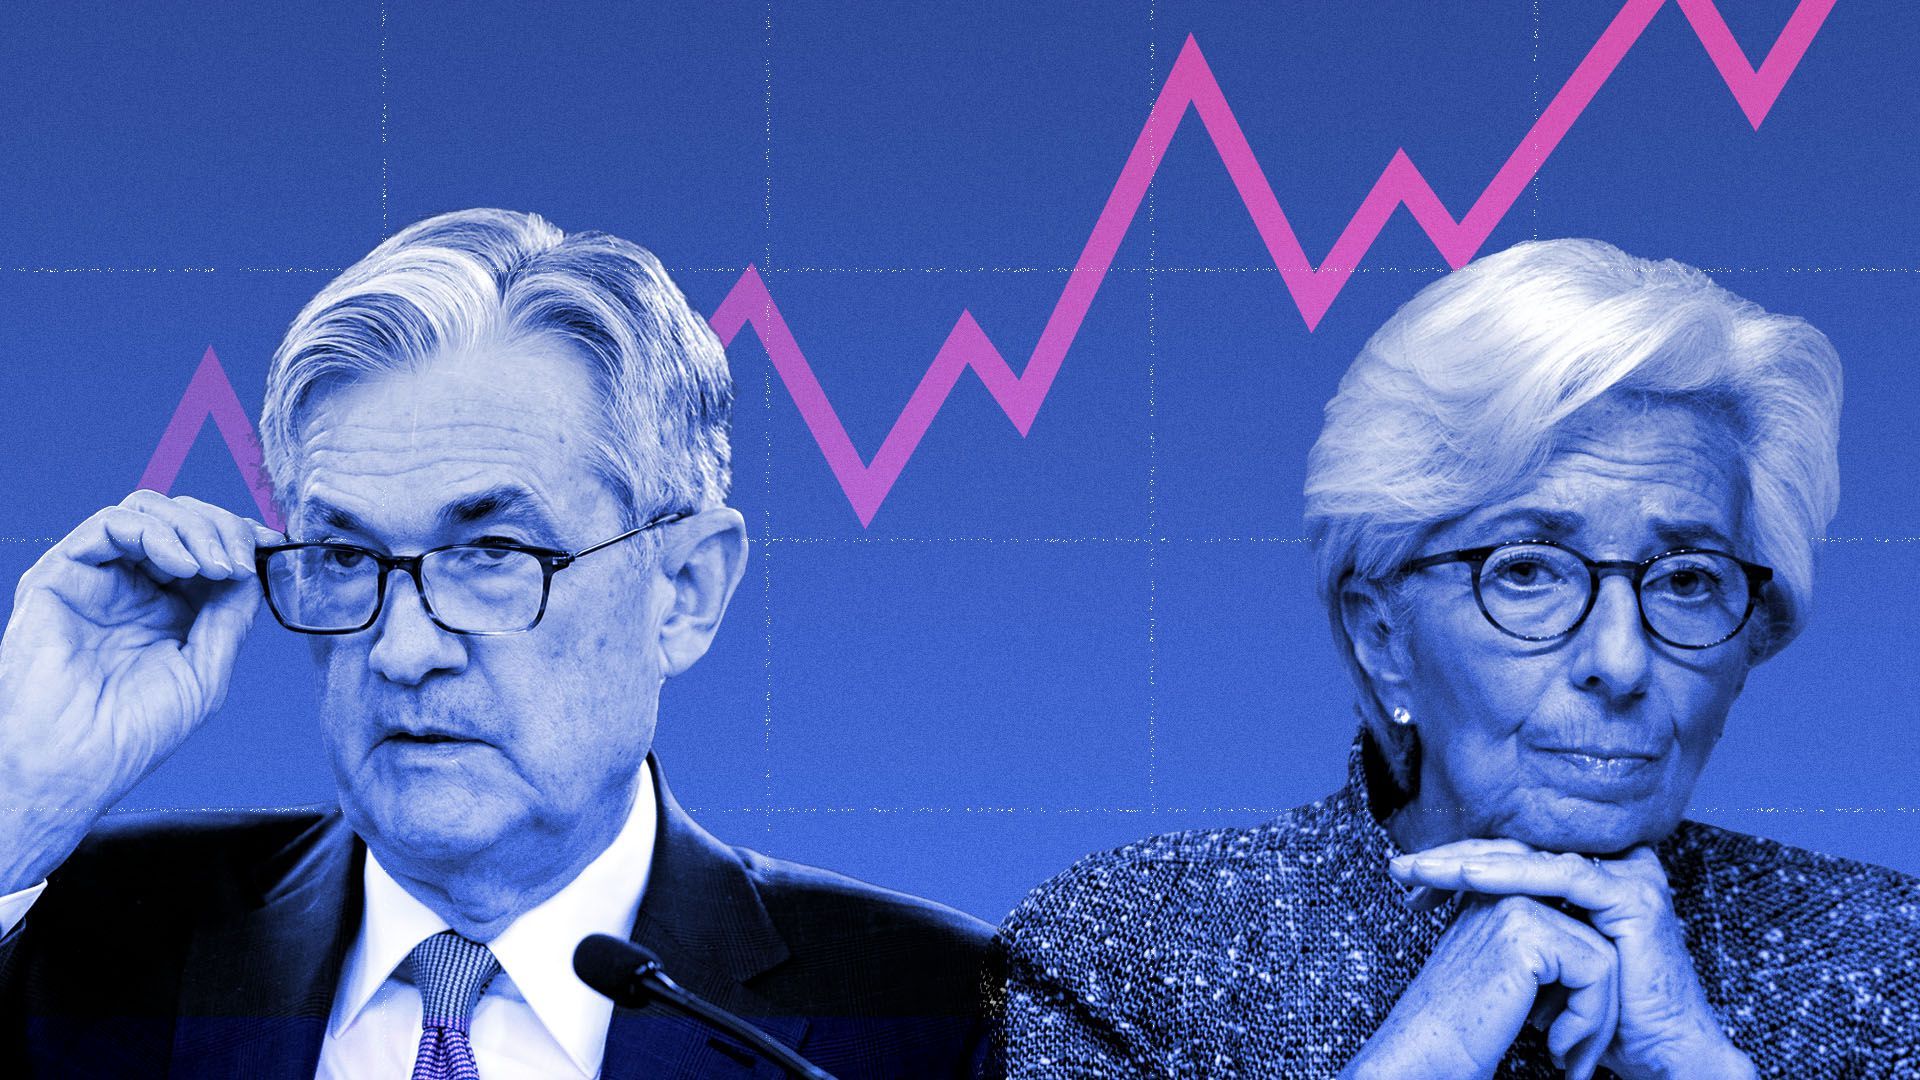 Photo illustration of Jerome Powell and Christine Lagarde with an upward trend line in the background